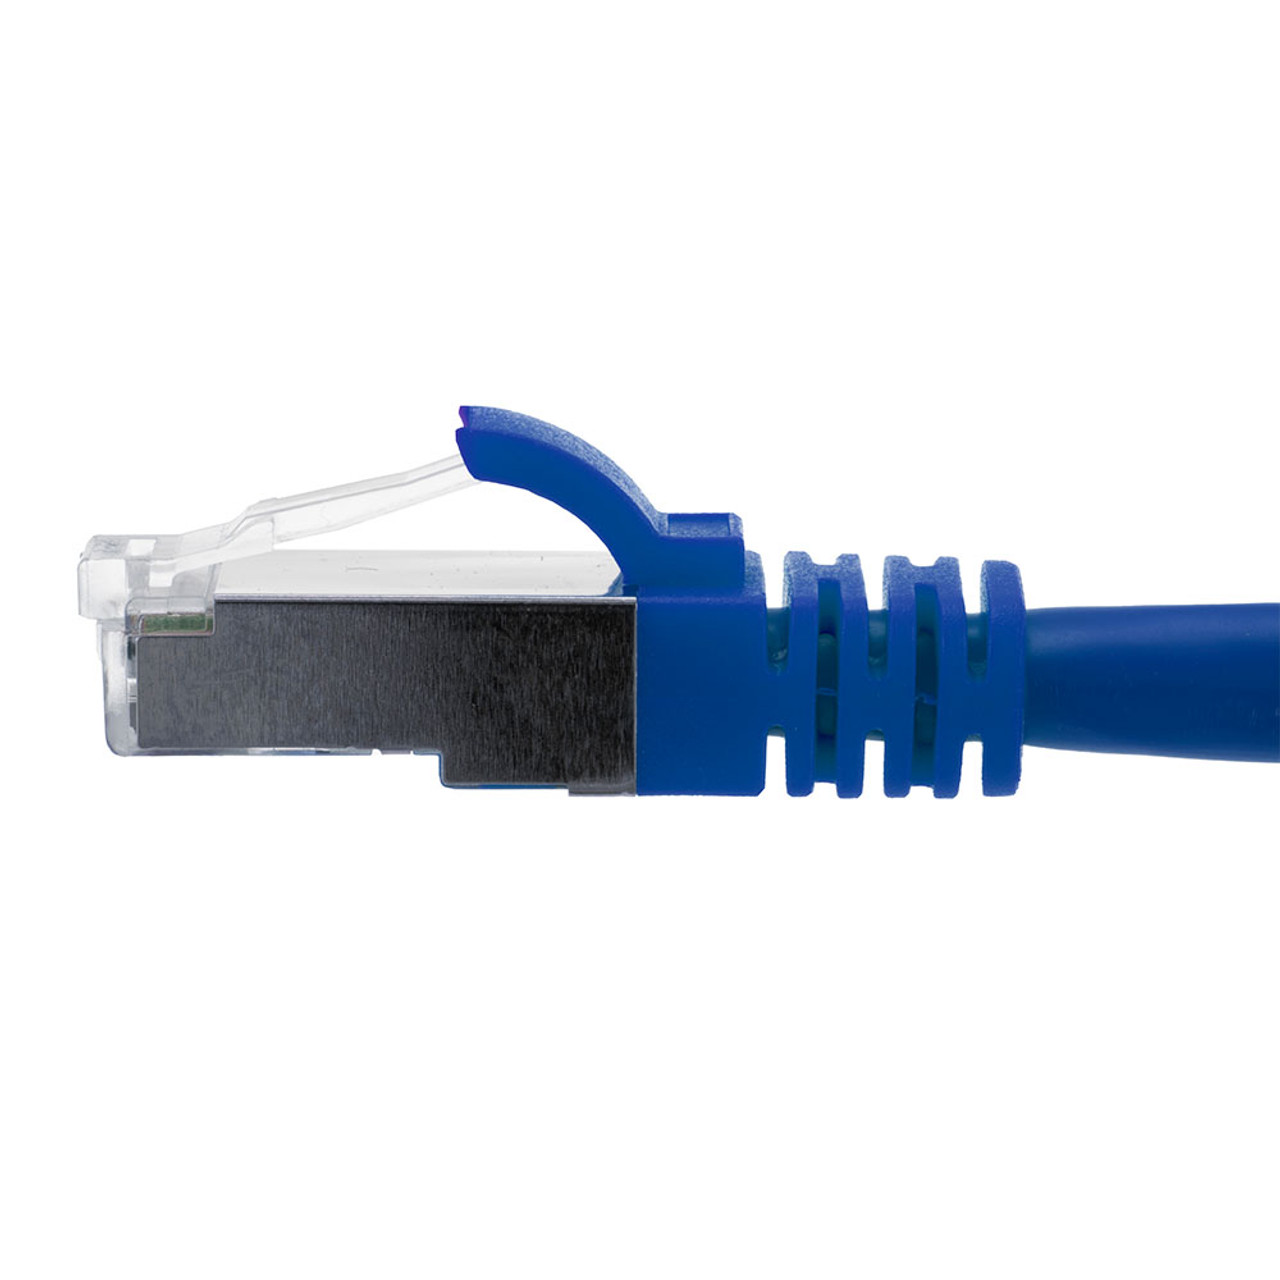 Ethernet Patch Cable CAT6A, S/FTP, 26AWG, 5 Ft,  5 pack, Blue